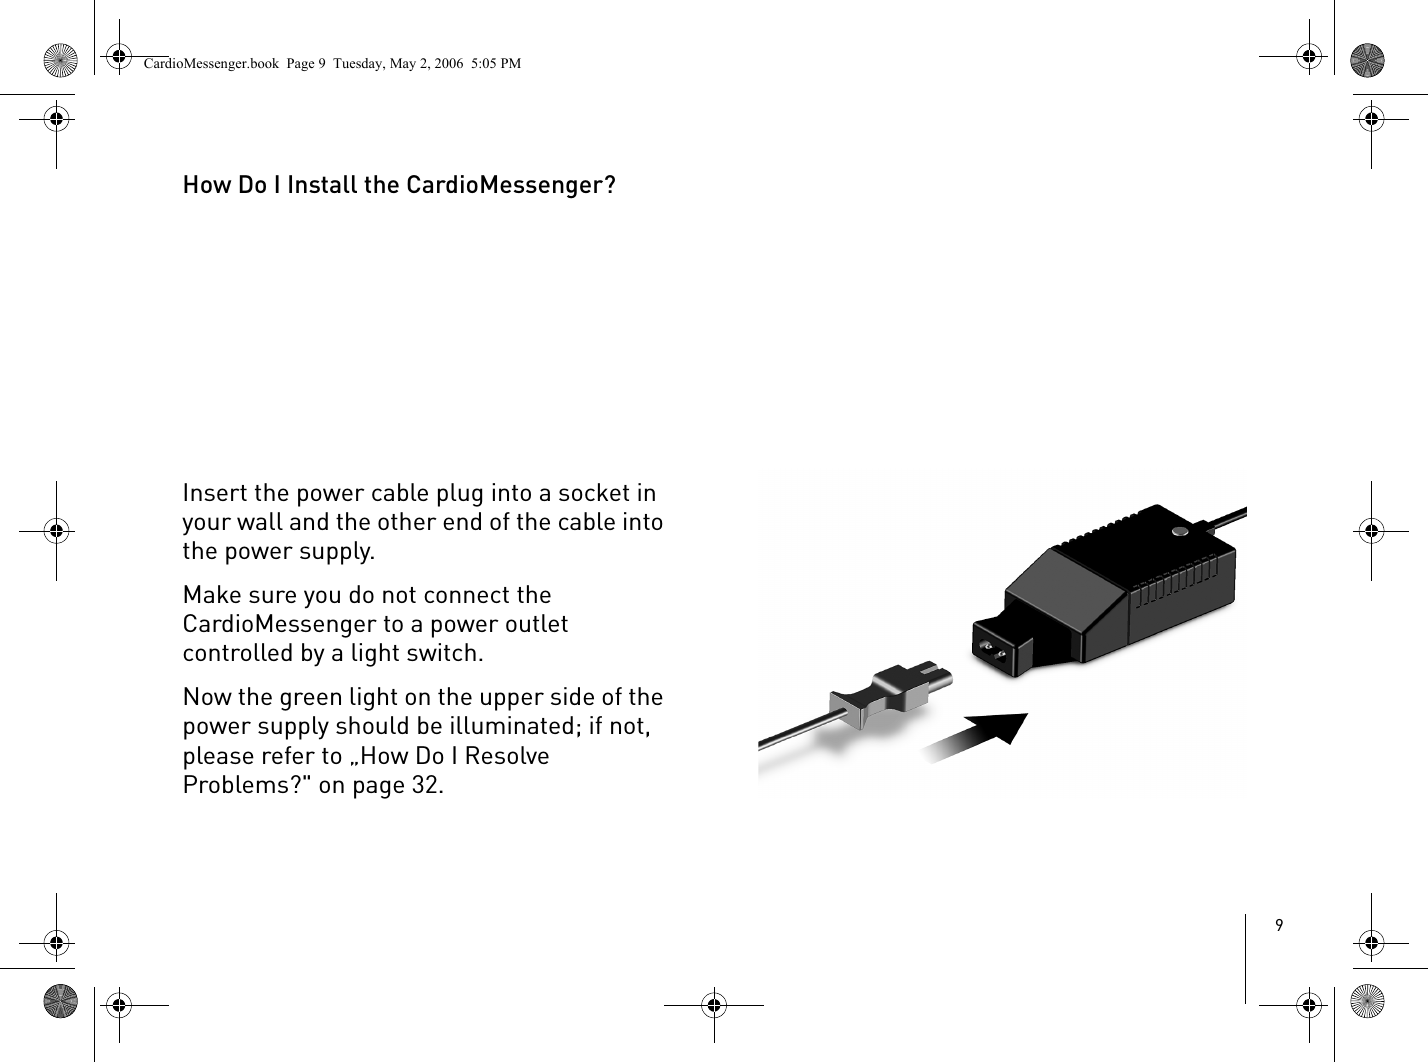 9How Do I Install the CardioMessenger?Insert the power cable plug into a socket in your wall and the other end of the cable into the power supply. Make sure you do not connect the CardioMessenger to a power outlet controlled by a light switch.Now the green light on the upper side of the power supply should be illuminated; if not, please refer to „How Do I Resolve Problems?&quot; on page 32.CardioMessenger.book  Page 9  Tuesday, May 2, 2006  5:05 PM